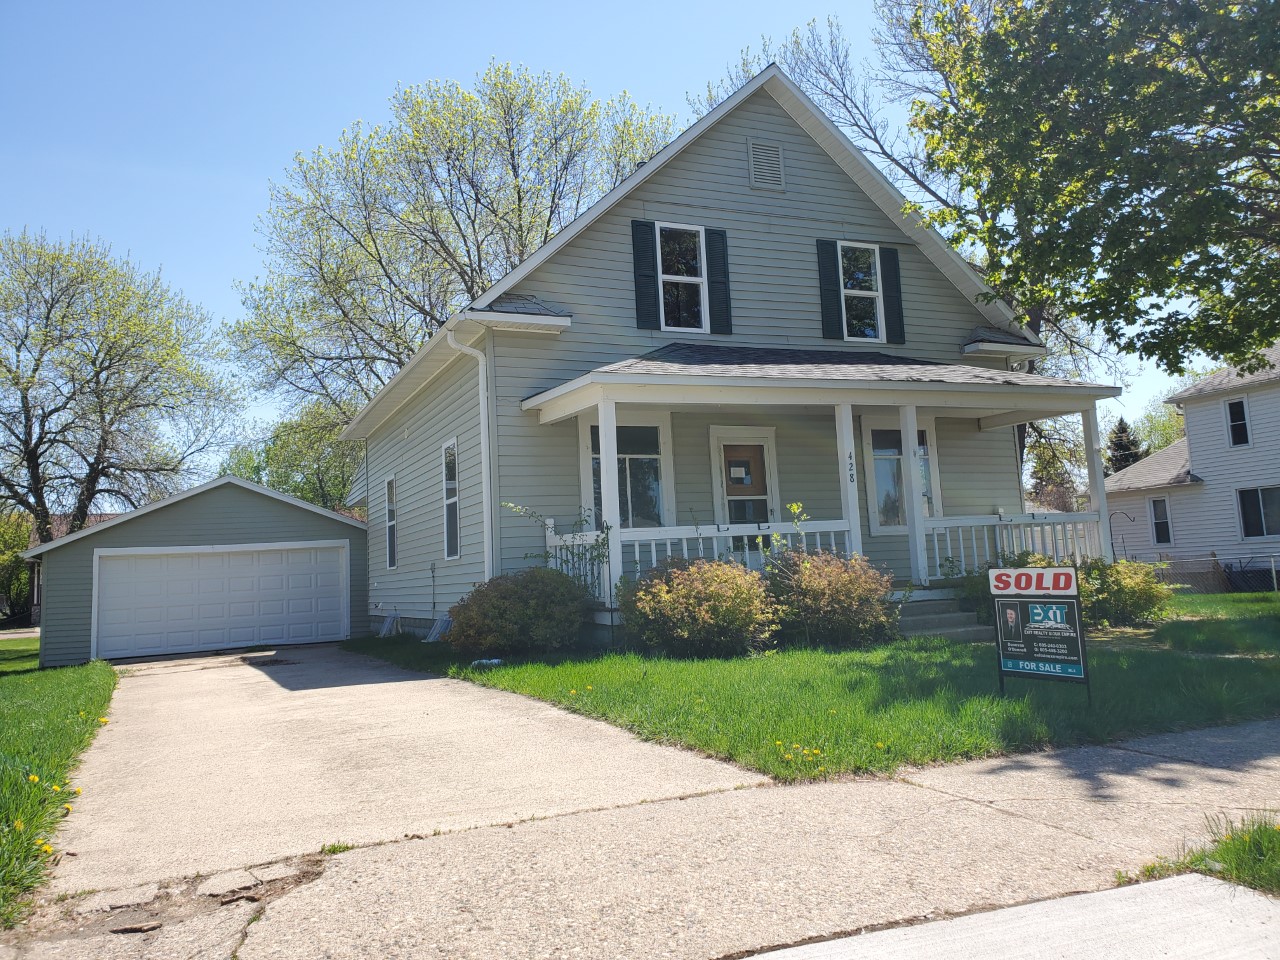 428 S. Main St. Lennox, SD is now SOLD by Donovan O'Donnell